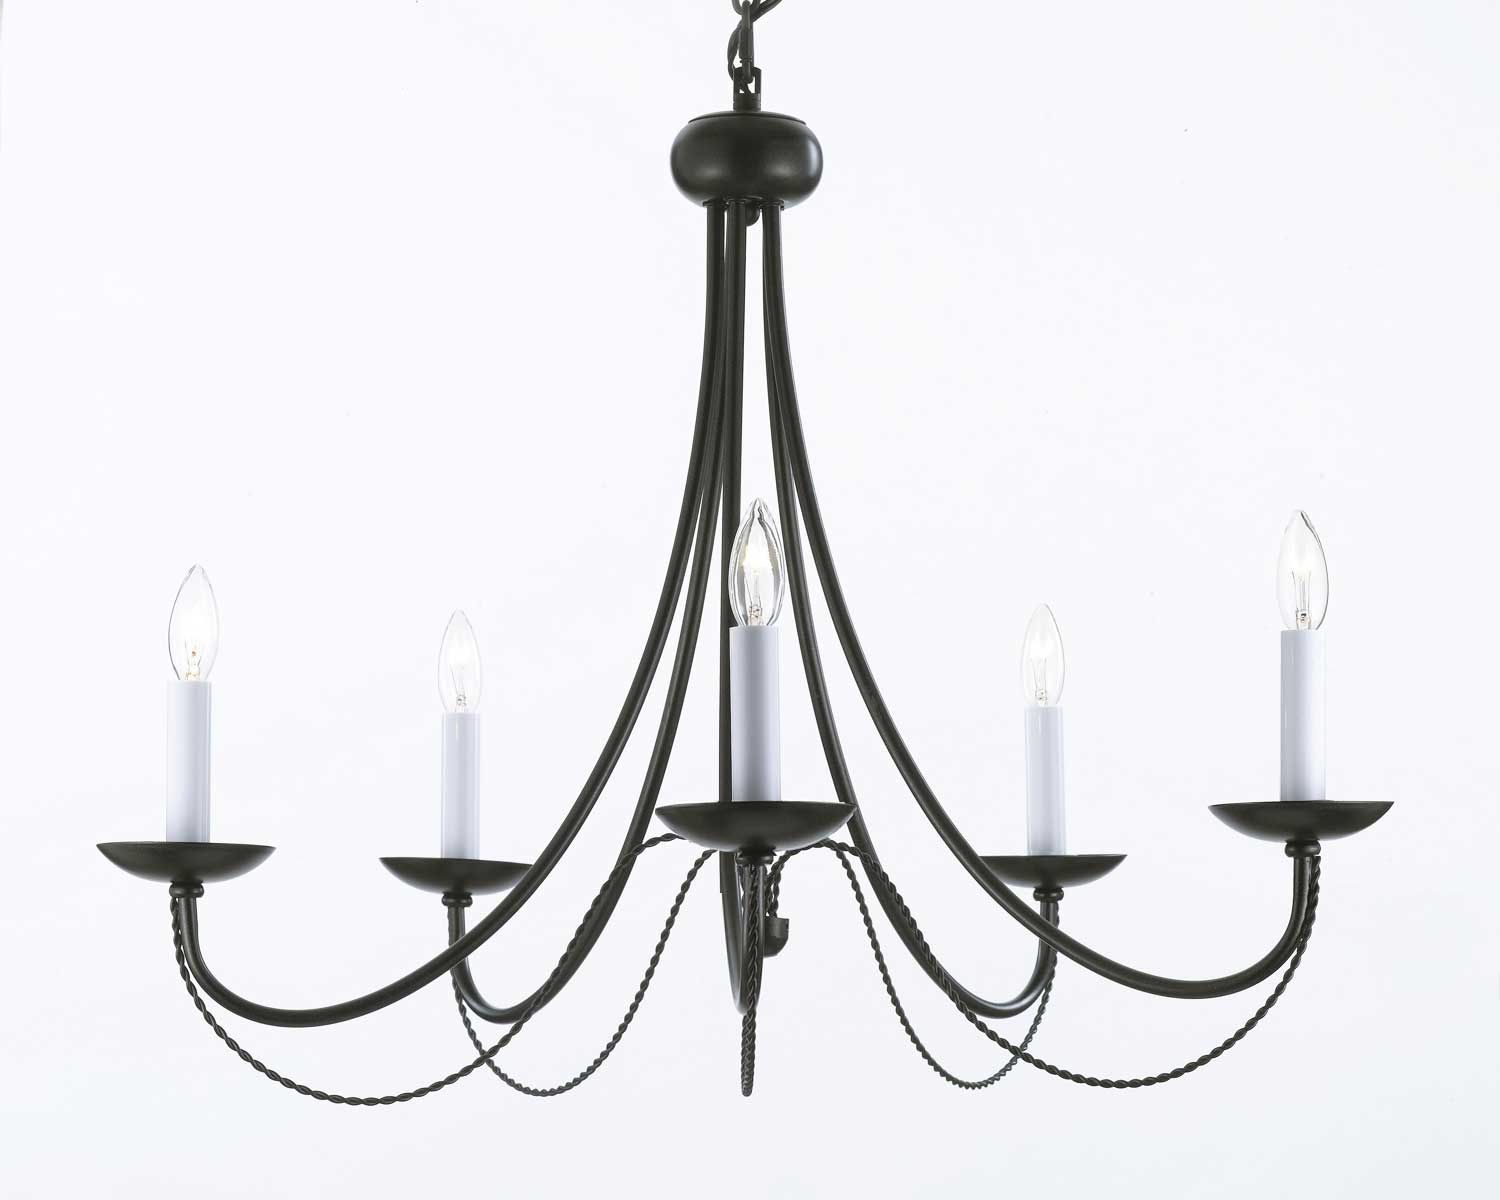 A7 4035 Gallery Wrought Without Crystal Wrought Iron Chandelier Intended For Modern Wrought Iron Chandeliers (View 5 of 15)